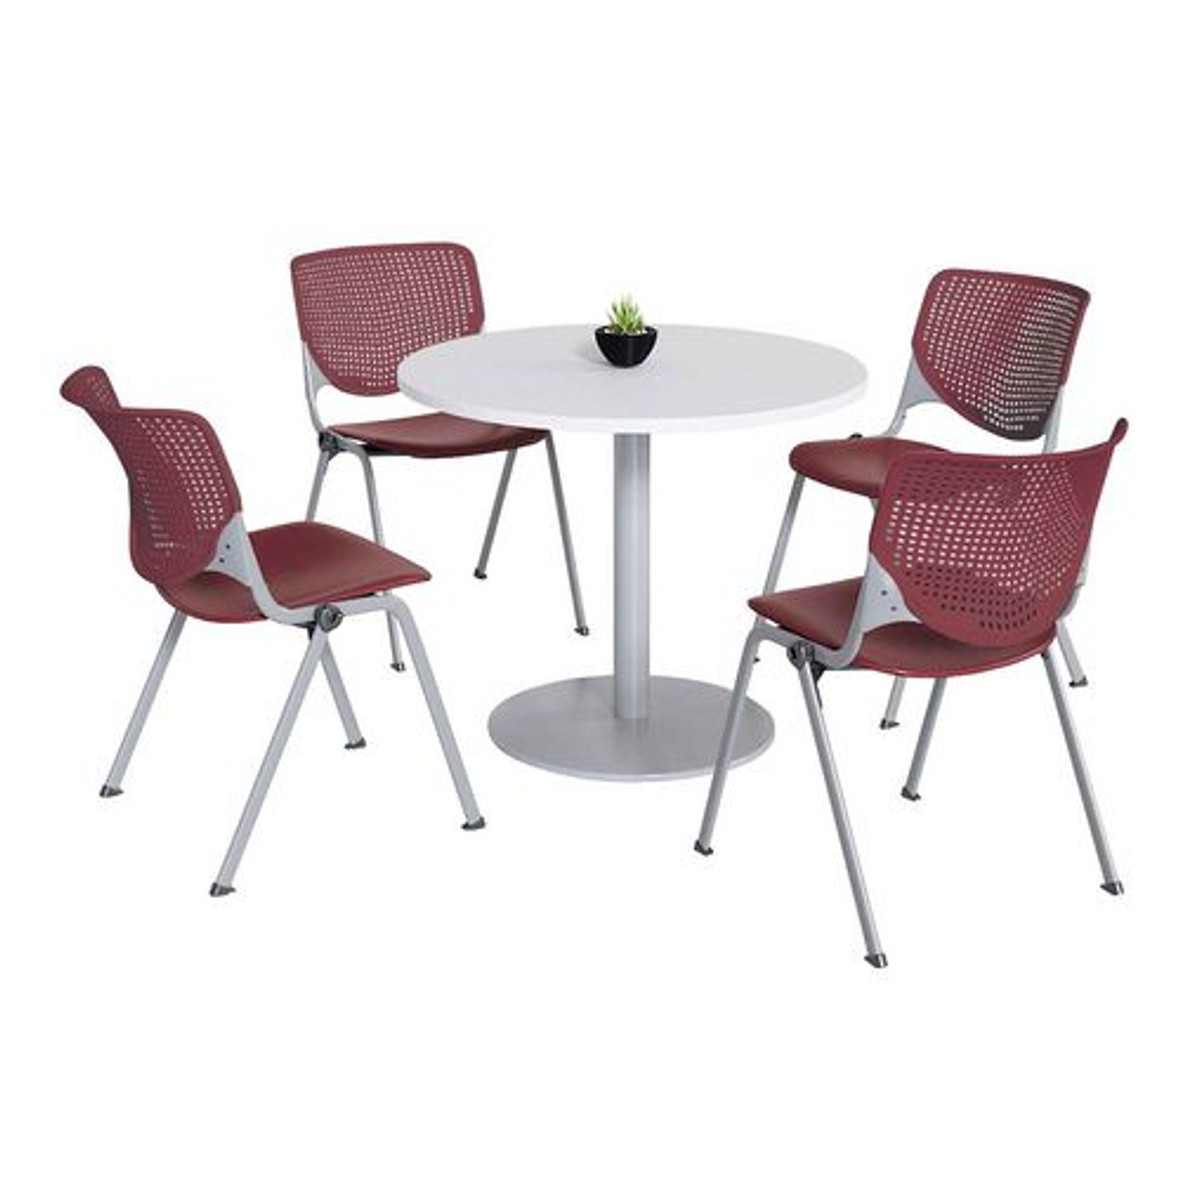 KFI Studios Pedestal Table With Four Burgundy Kool Series Chairs, Round, 36" Dia X 29h, Designer White, Ships In 4-6 Business Days